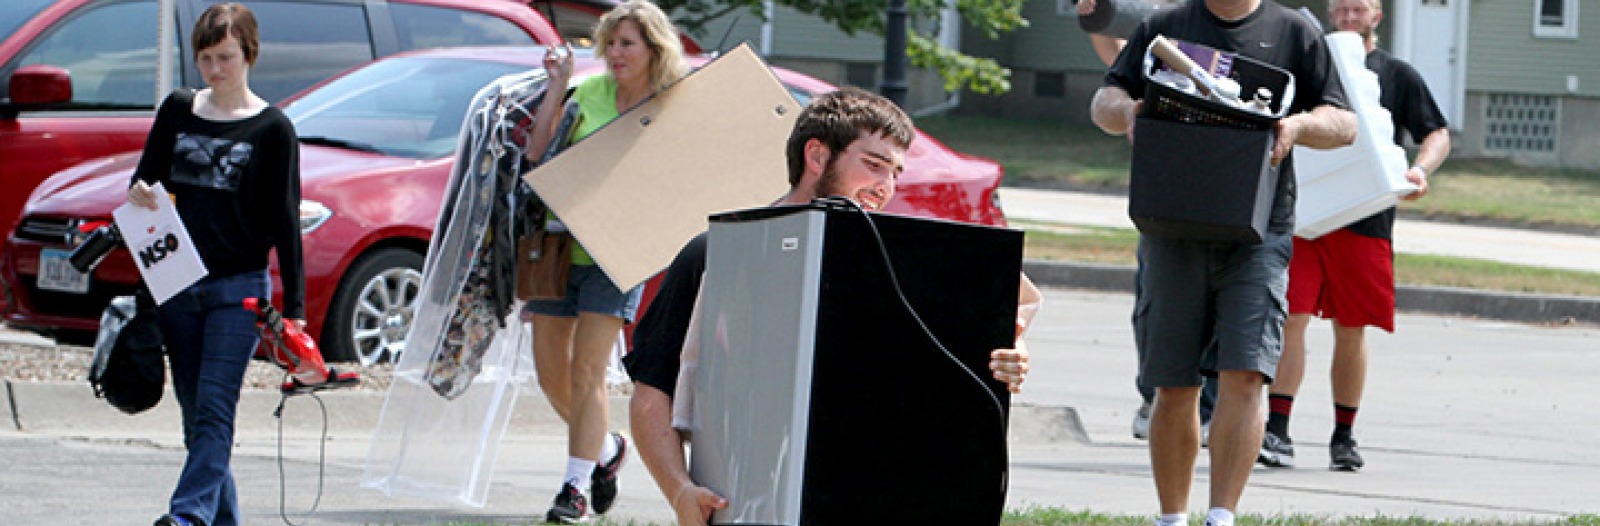 Family members help students carry belongings to a residence hall.